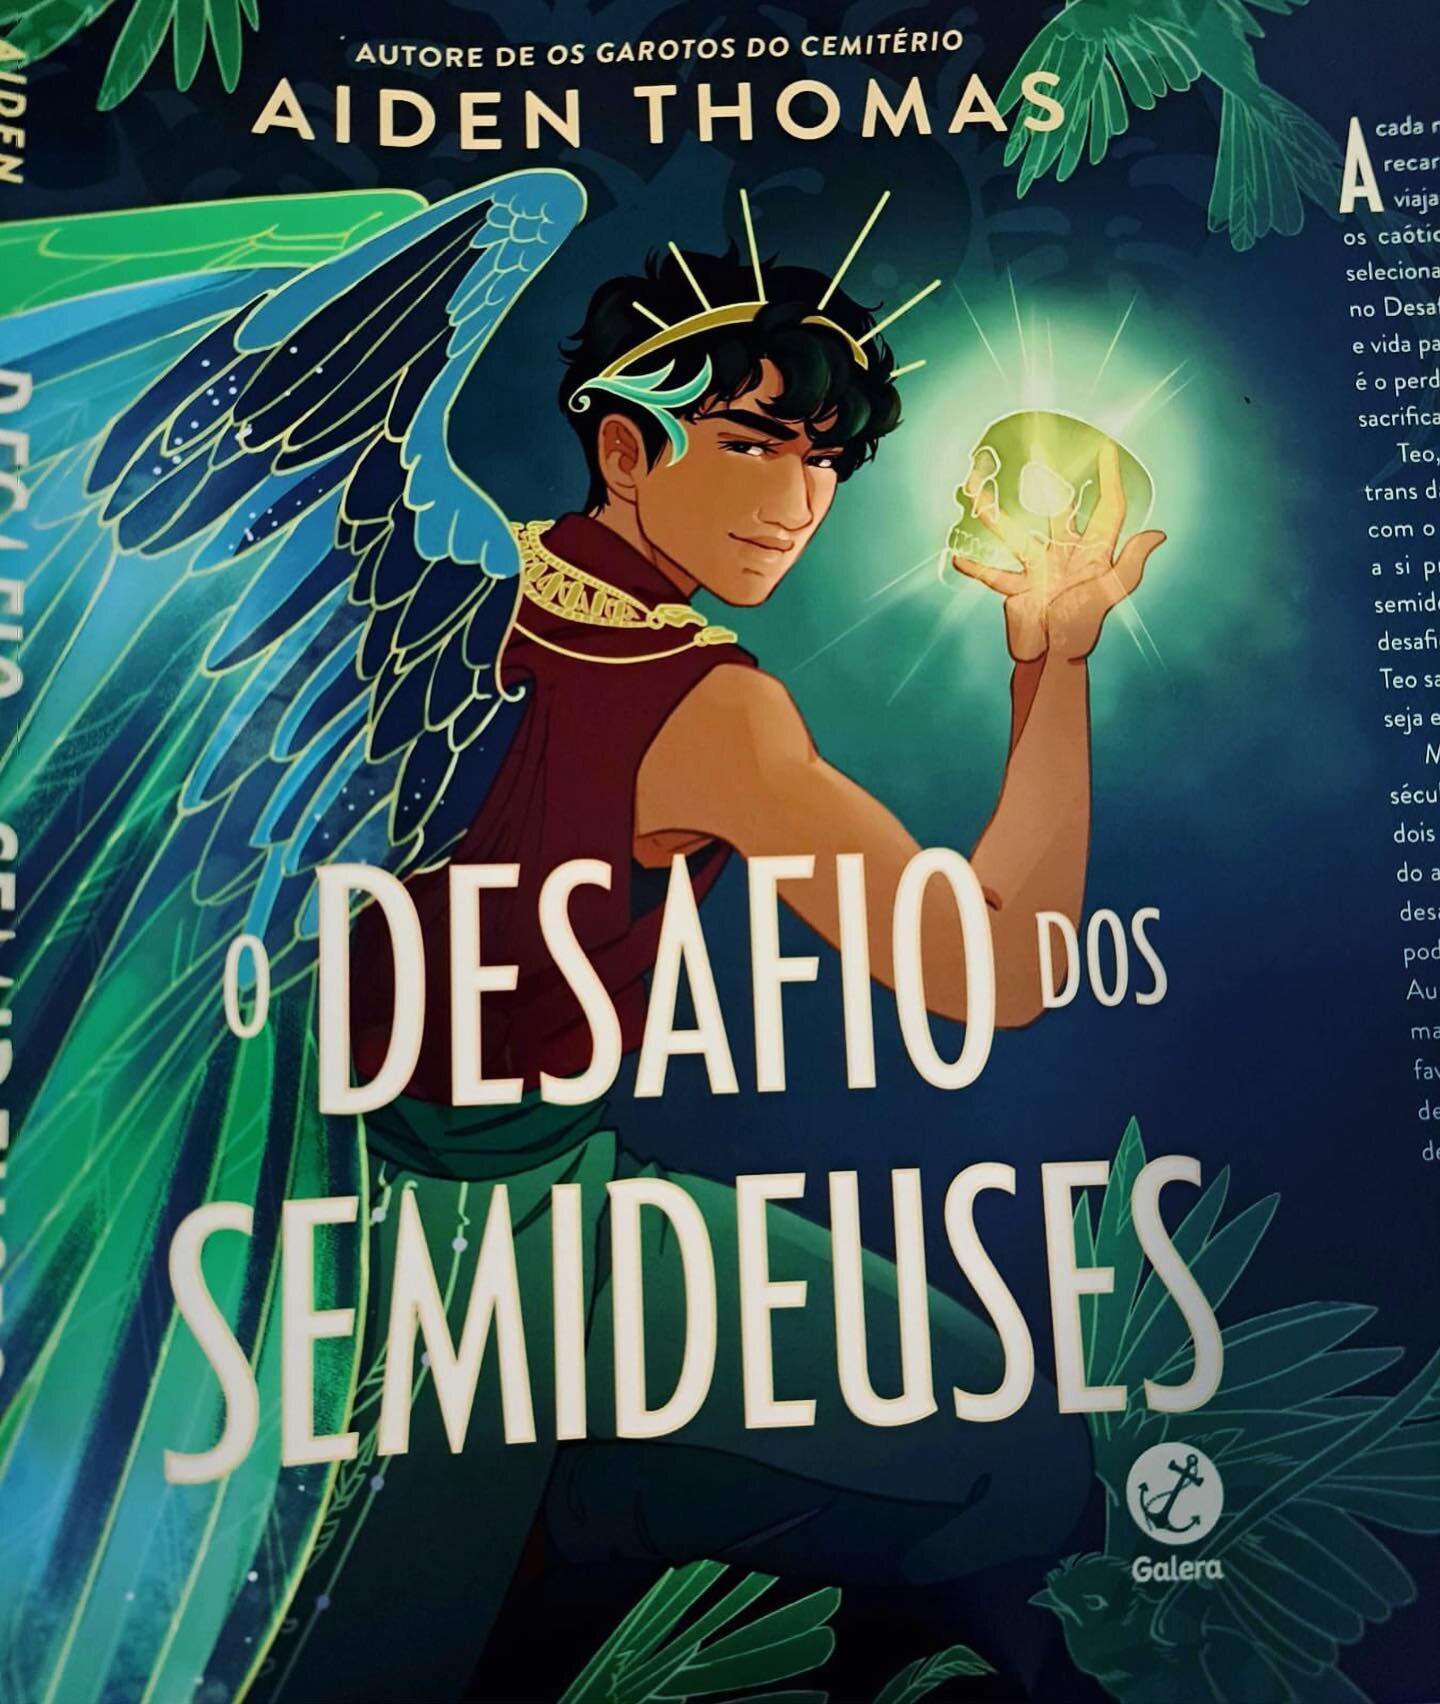 BRASIL!!! ☀️O Desafio Dos Semideuses☀️ is coming!!!

and it&rsquo;s the first time Galera has used non-binary language throughout the book?!?! 😱😱😱 i&rsquo;m so excited!!!